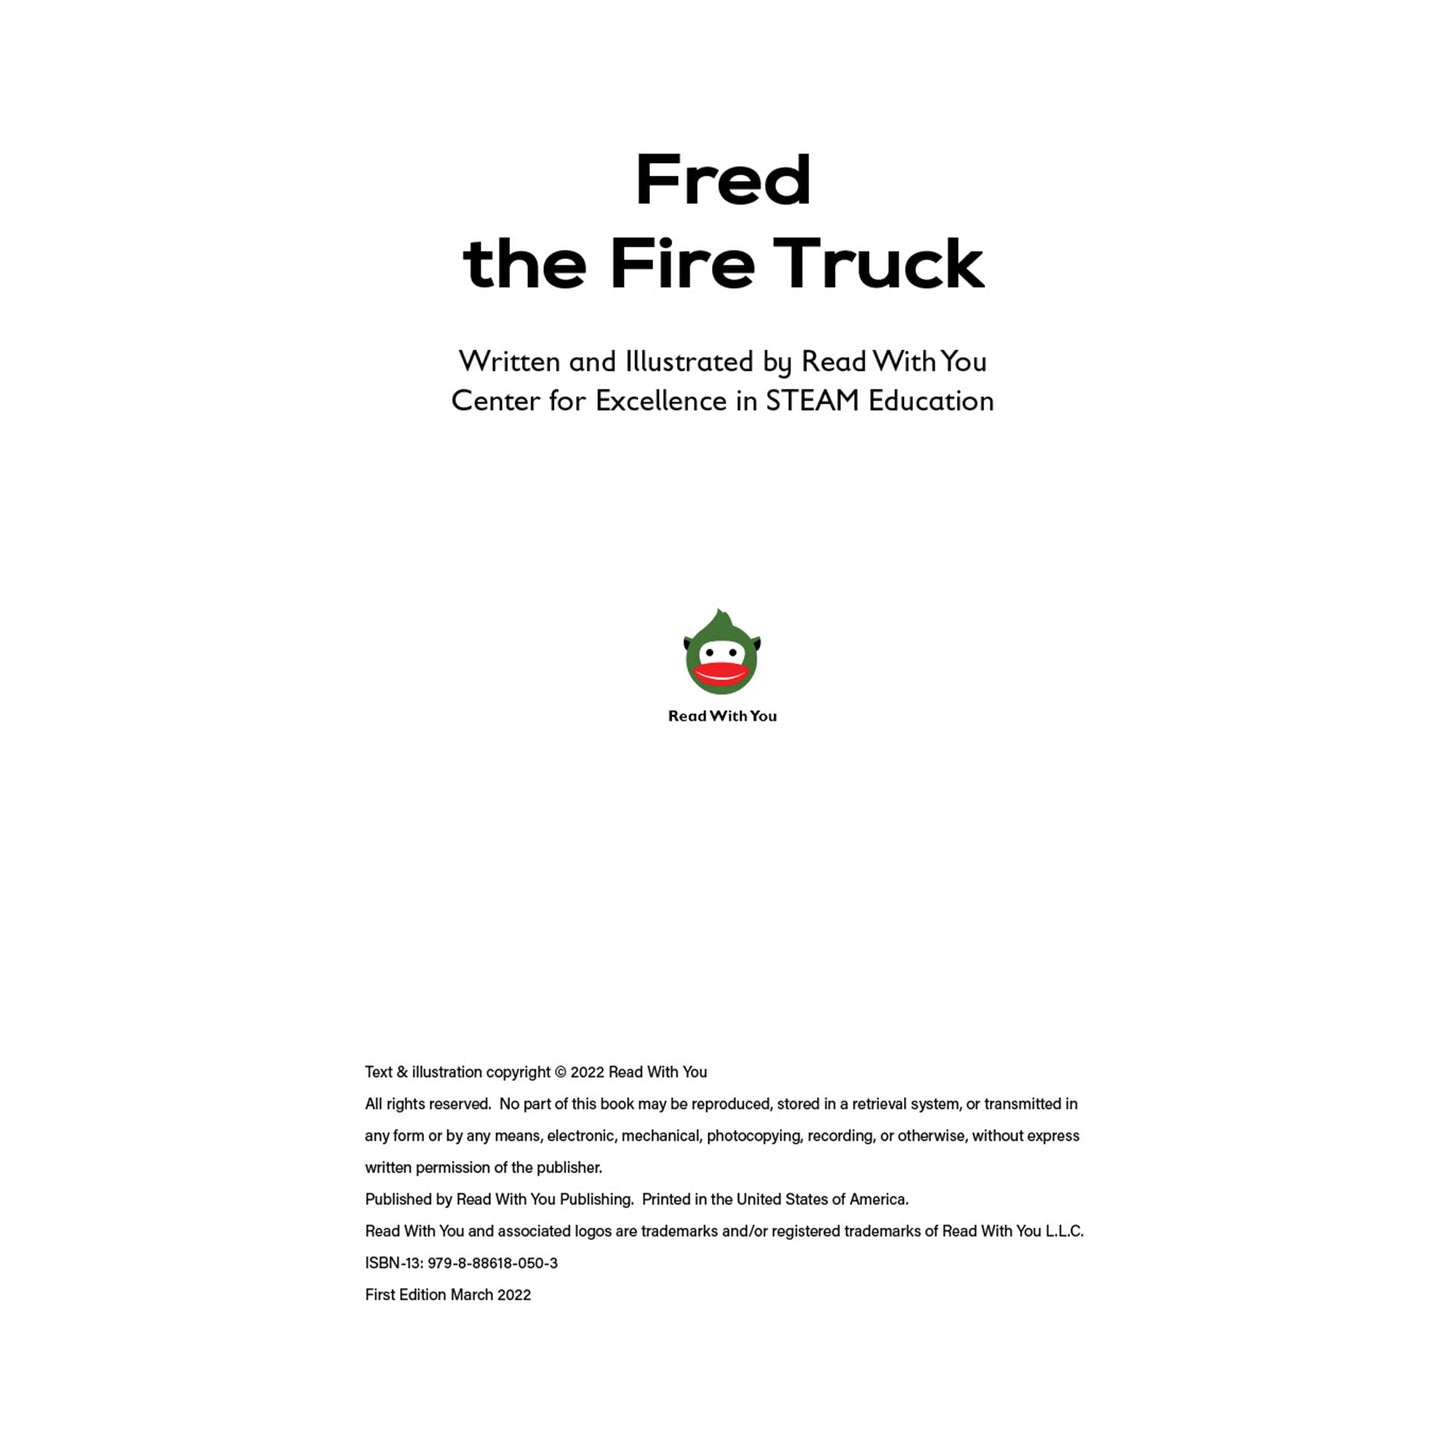 Fred the Fire Truck